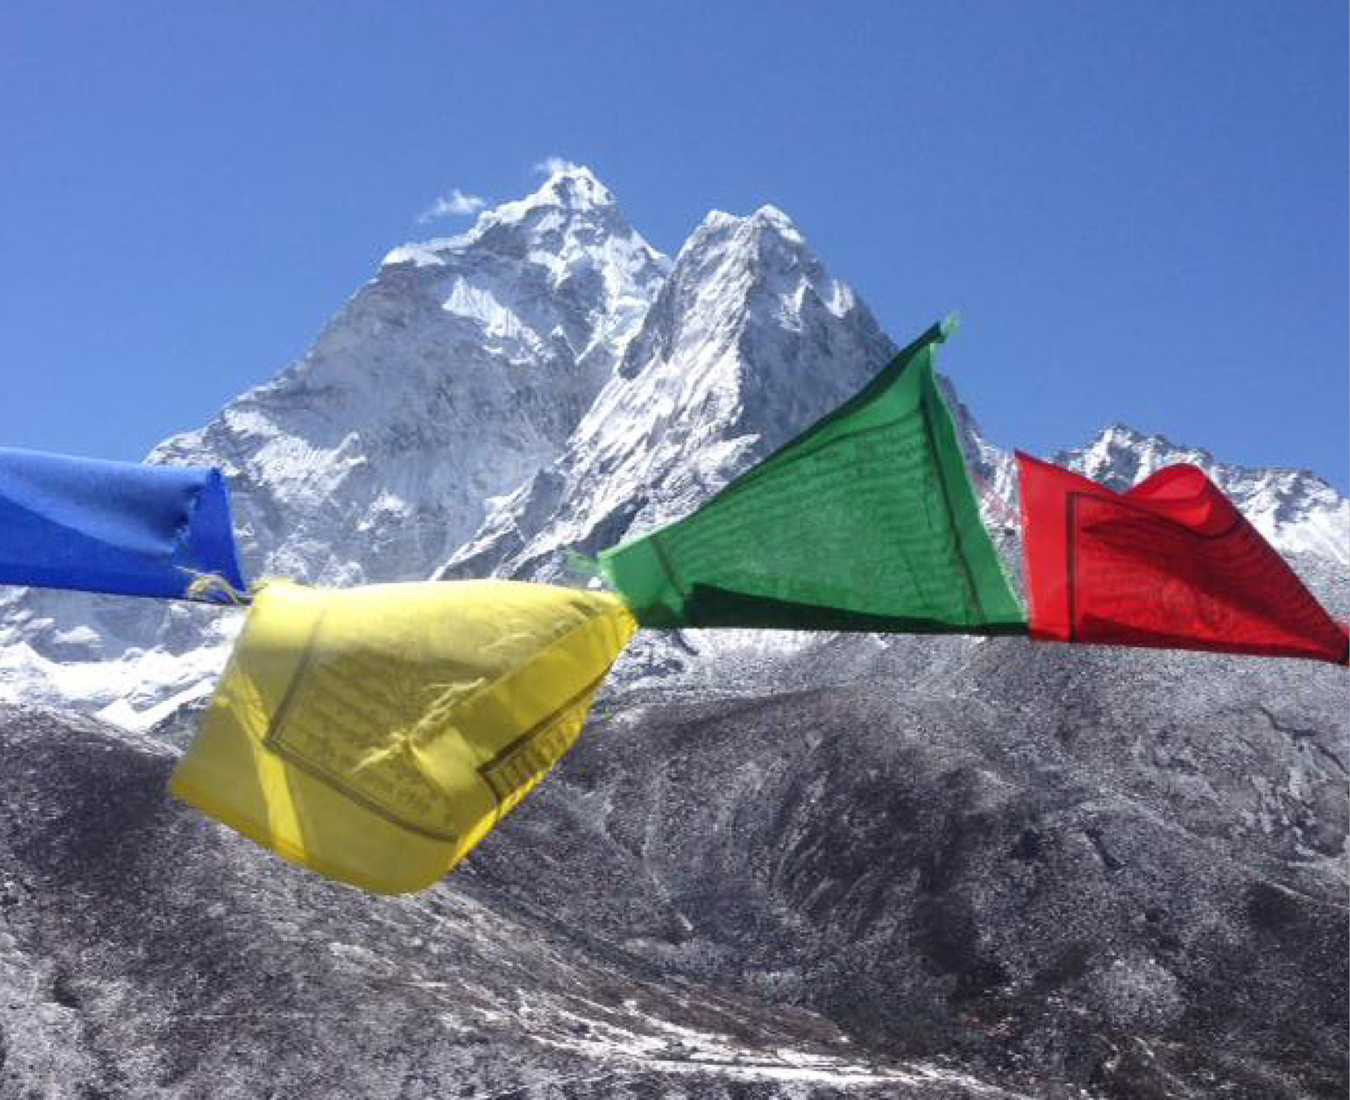 Prayer flags flutter in the breeze with Mount Ama Dablam covered in snow behind.